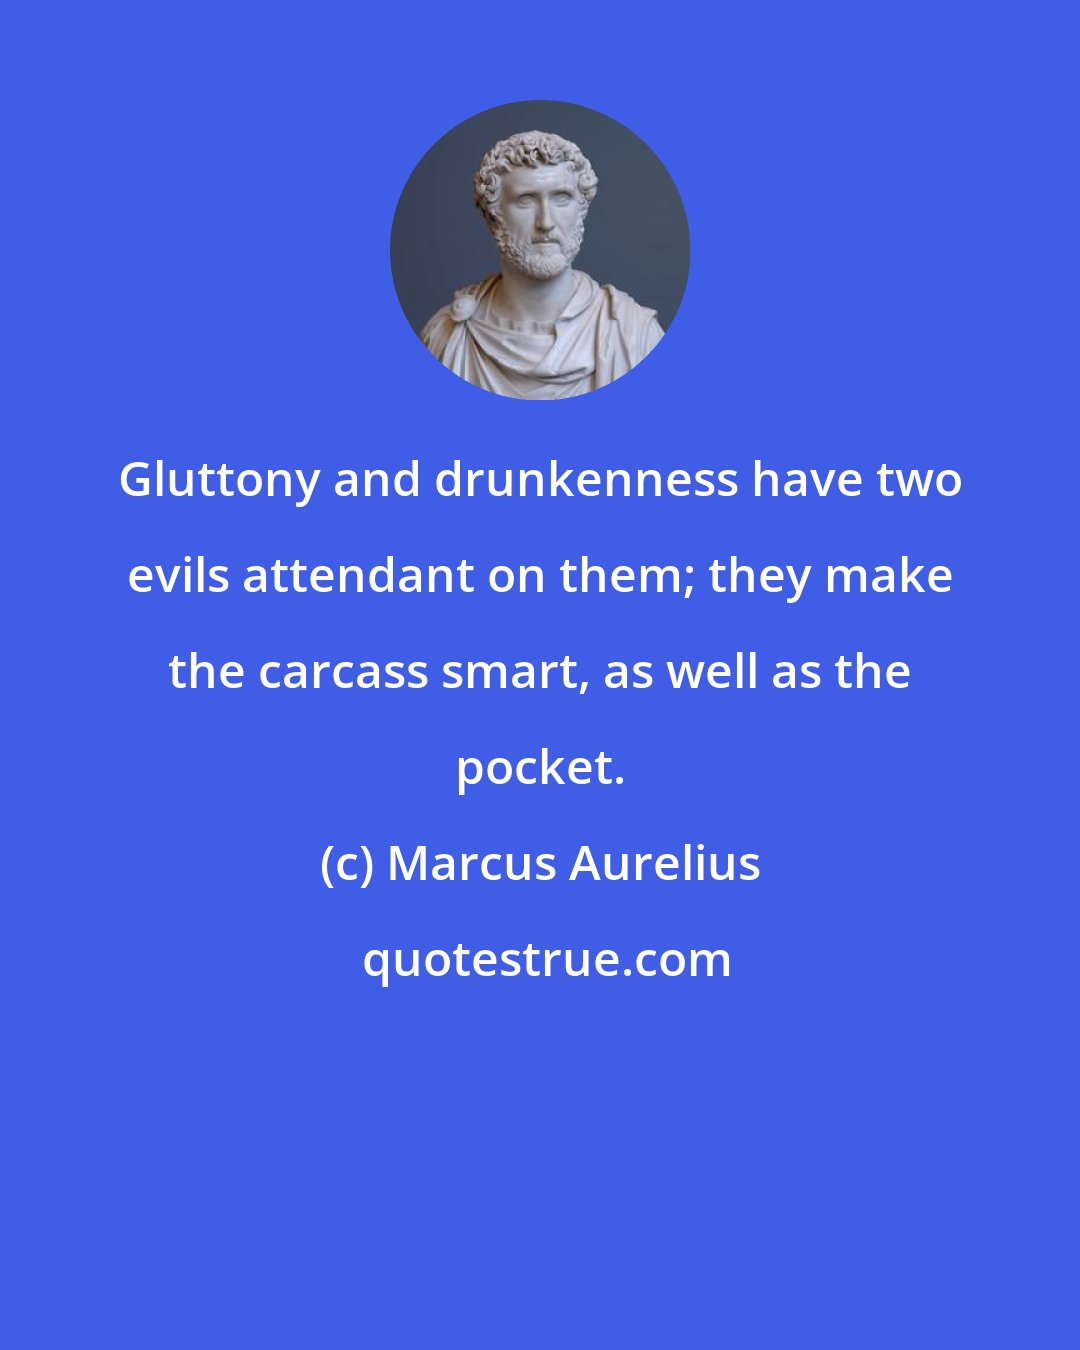 Marcus Aurelius: Gluttony and drunkenness have two evils attendant on them; they make the carcass smart, as well as the pocket.